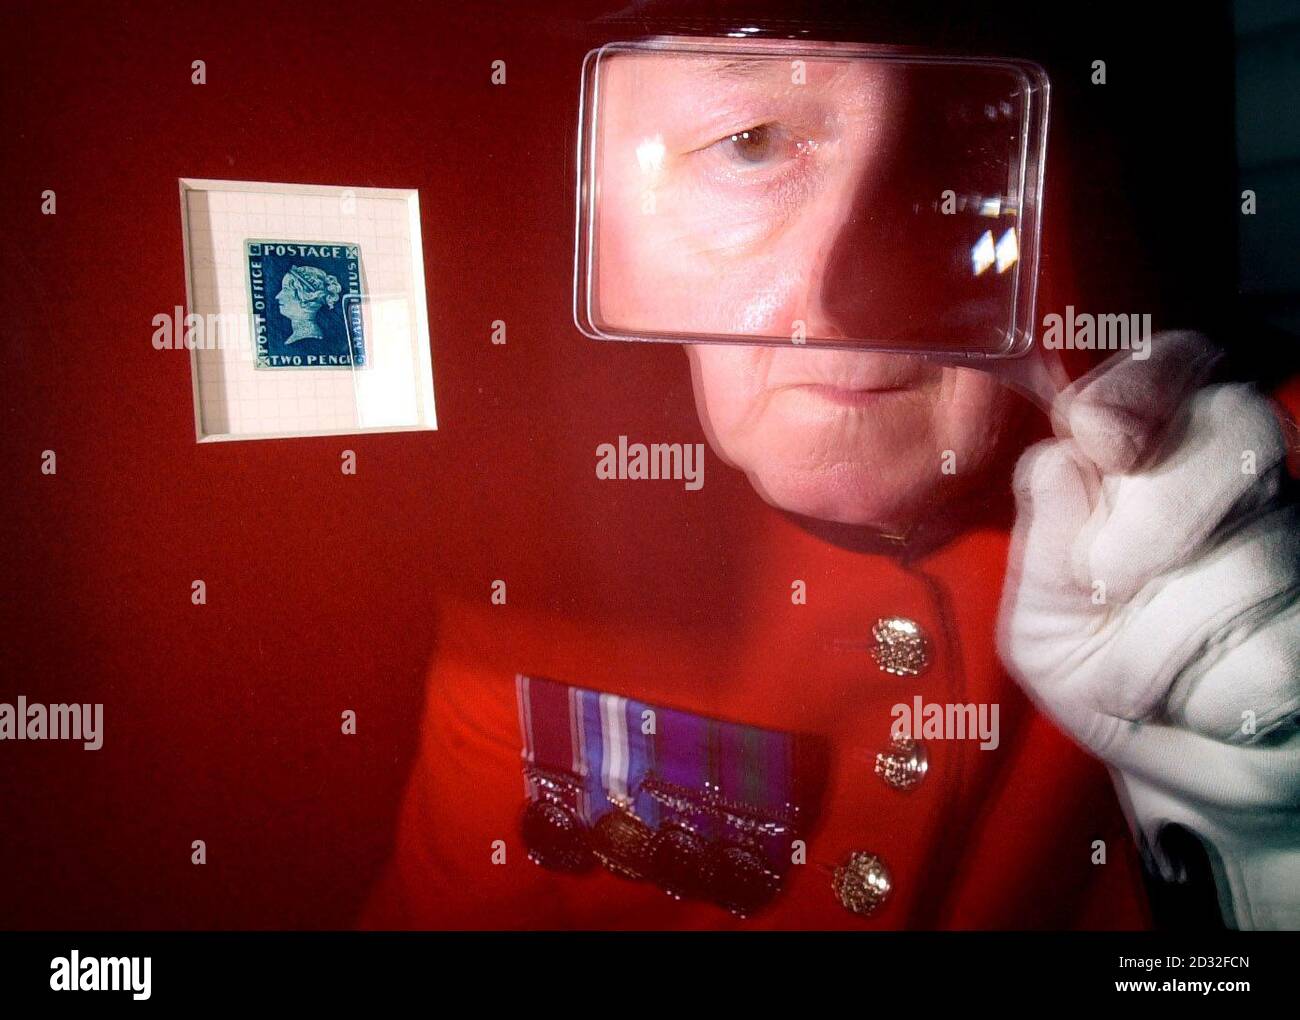 Chelsea pensioner Charlie Liddle, 68, from Leith, inspects an extremely rare 1847 Twopenny Blue stamp from Mauritius known as 'The Blue Mauritius', at the opening of the travelling 'Royal Philatelic Collection' at Holyroodhouse in Edinburgh. * The exhibition of the Collection, which belongs to the Royal Family, is the first public showing and forms part of the 2002 Jubilee celebrations. Stock Photo